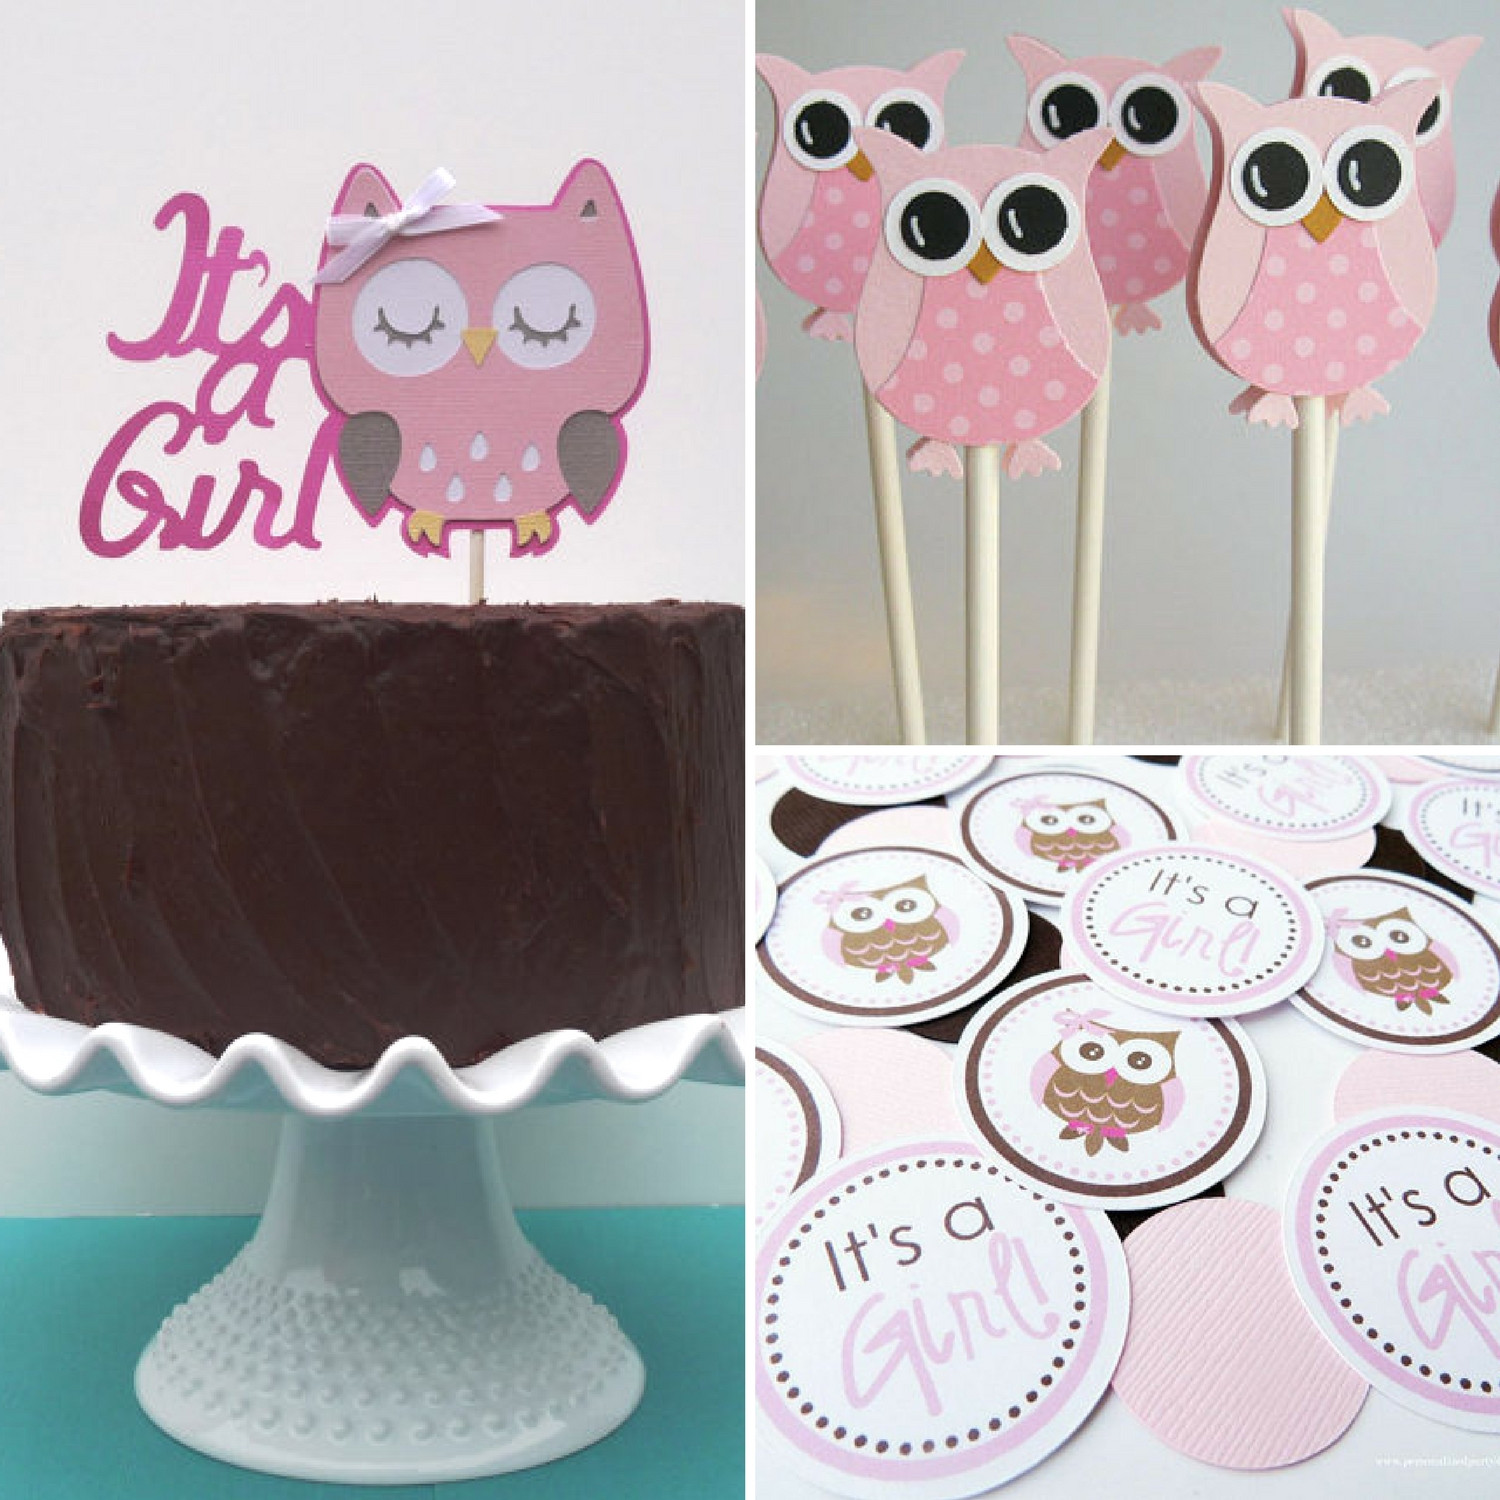 Owl Party Favors For Baby Shower
 Owl Themed Baby Shower Decorations and Party Favors Baby